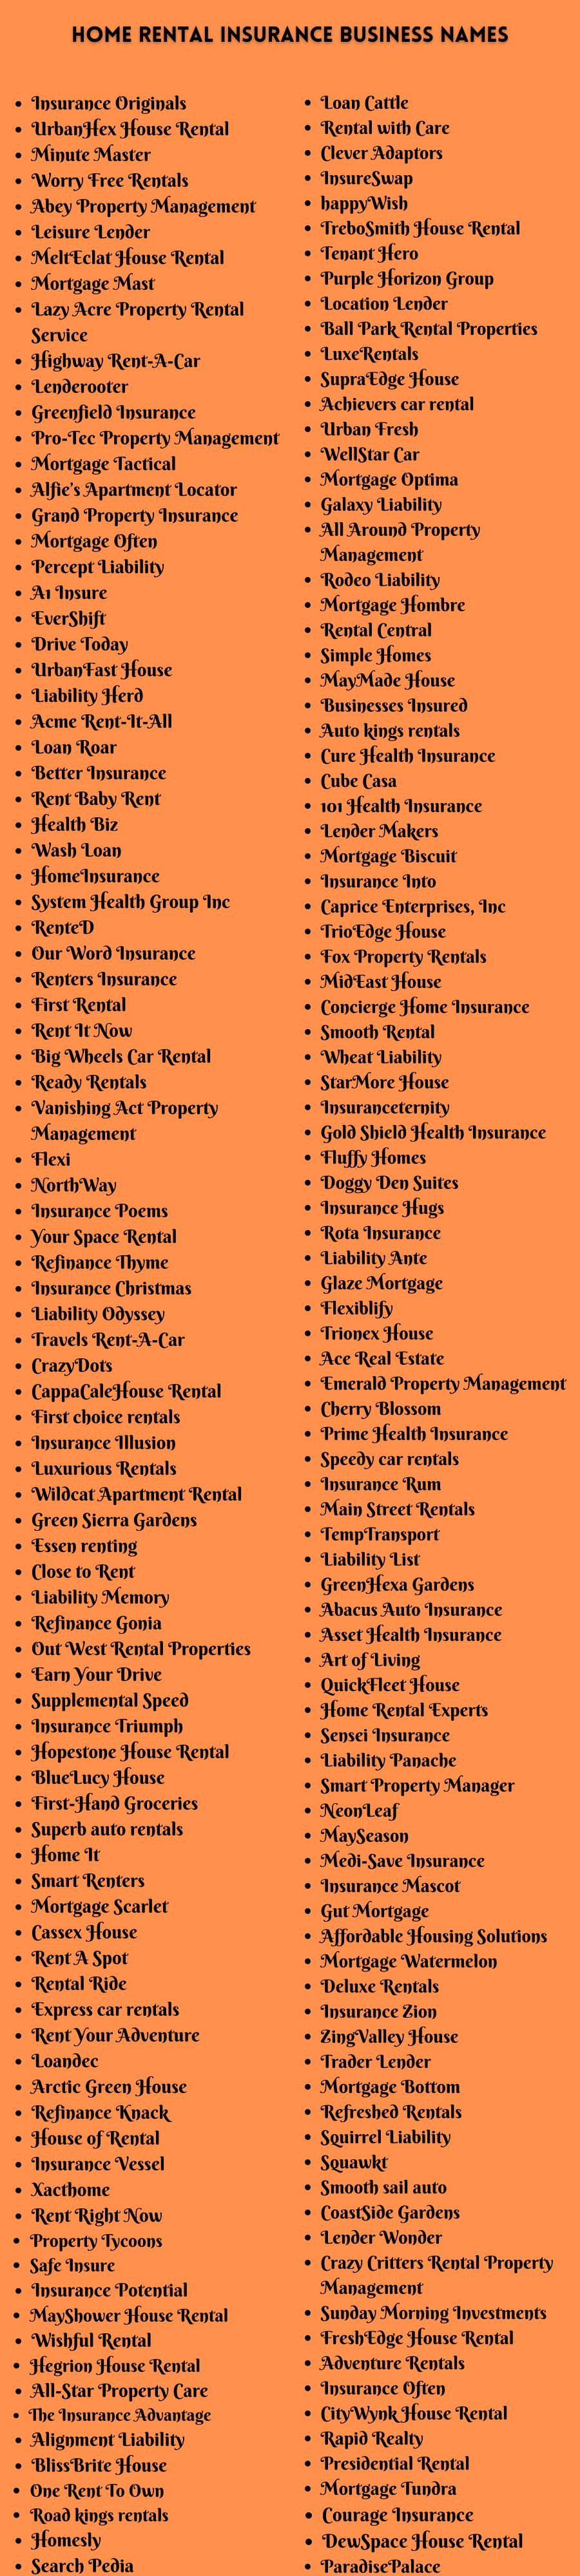 Home Rental Insurance Business Names